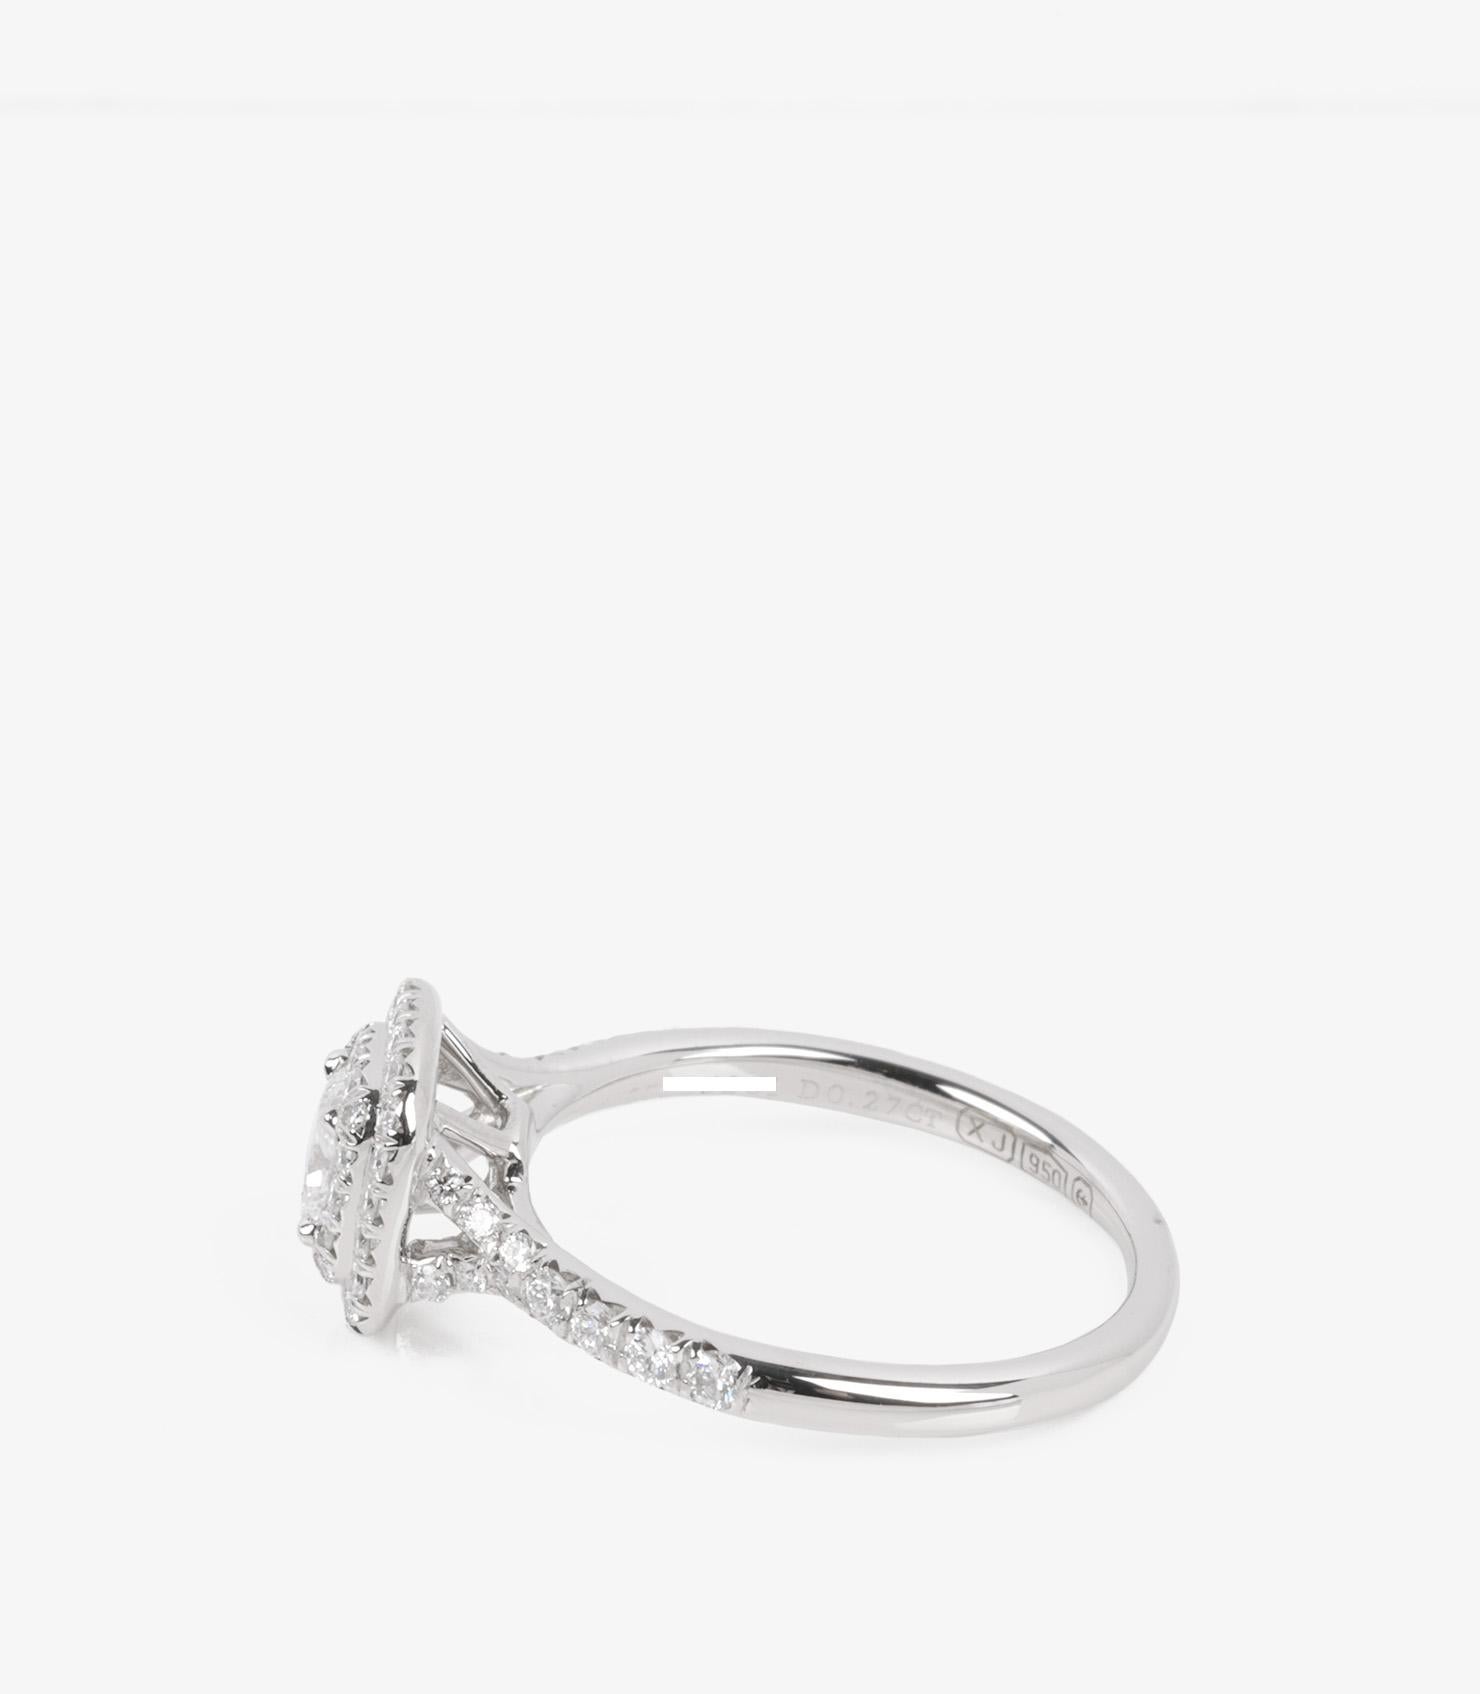 Tiffany & Co. 0.27ct Cushion Cut Diamond Platinum Soleste Ring In Excellent Condition For Sale In Bishop's Stortford, Hertfordshire